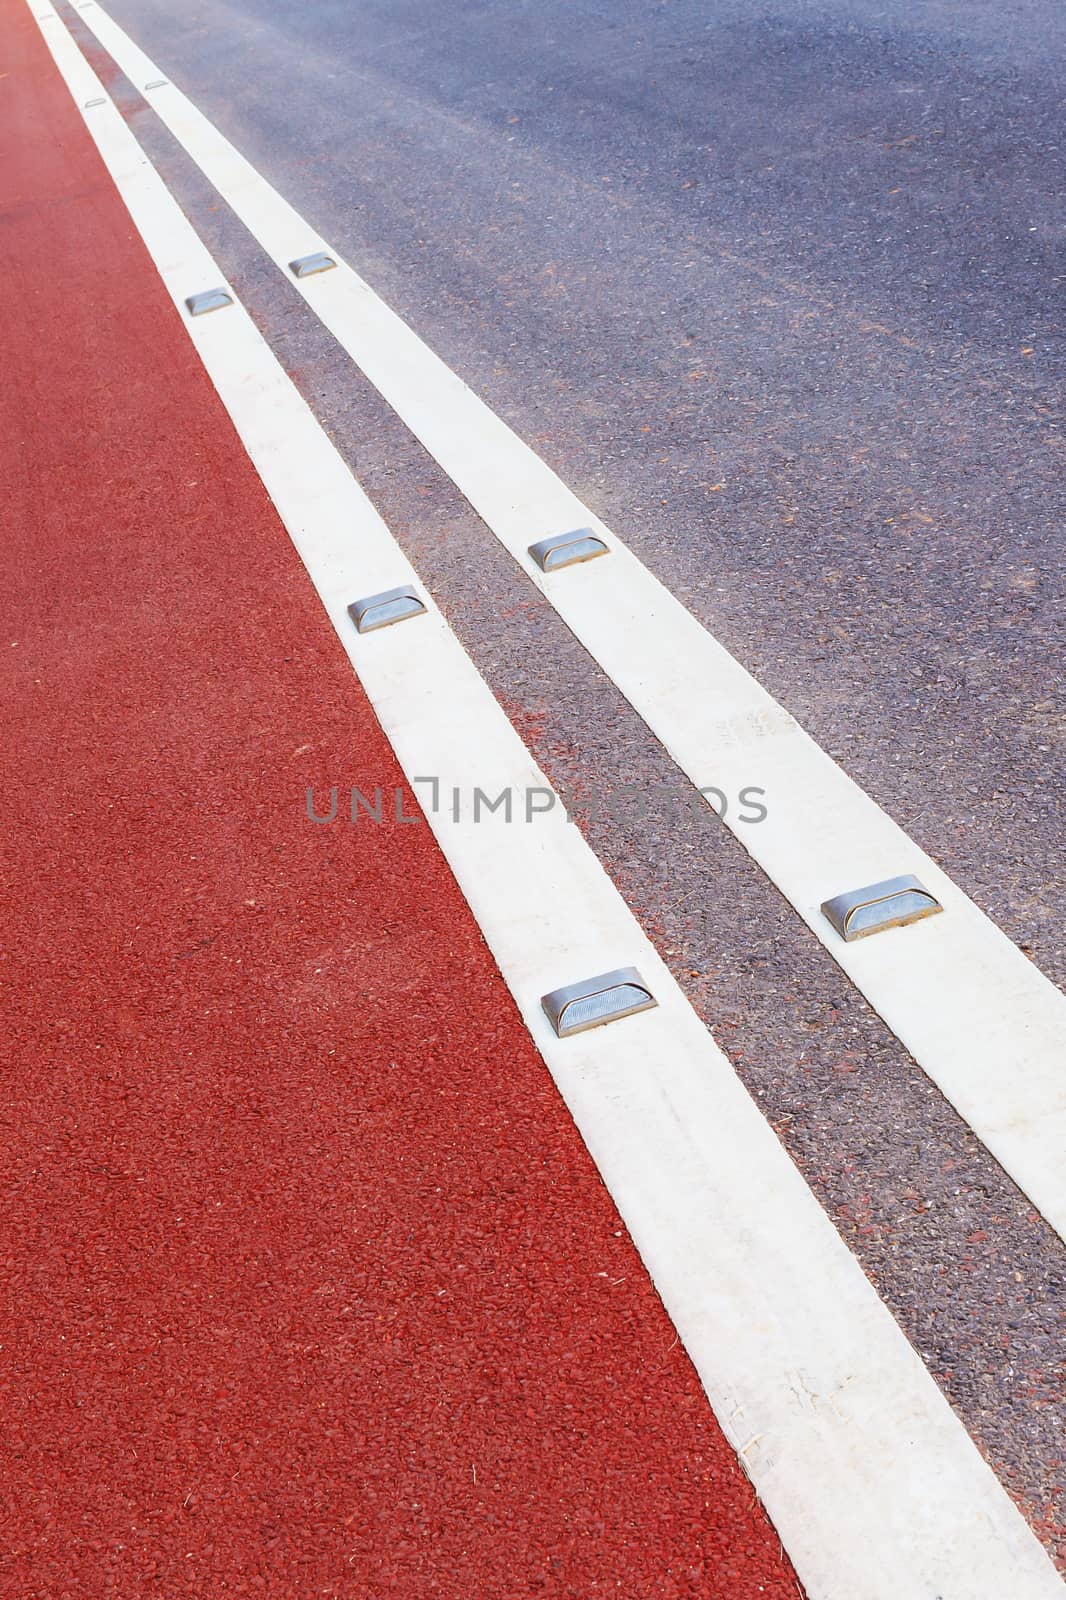 road stud with white reflector and red path by FrameAngel